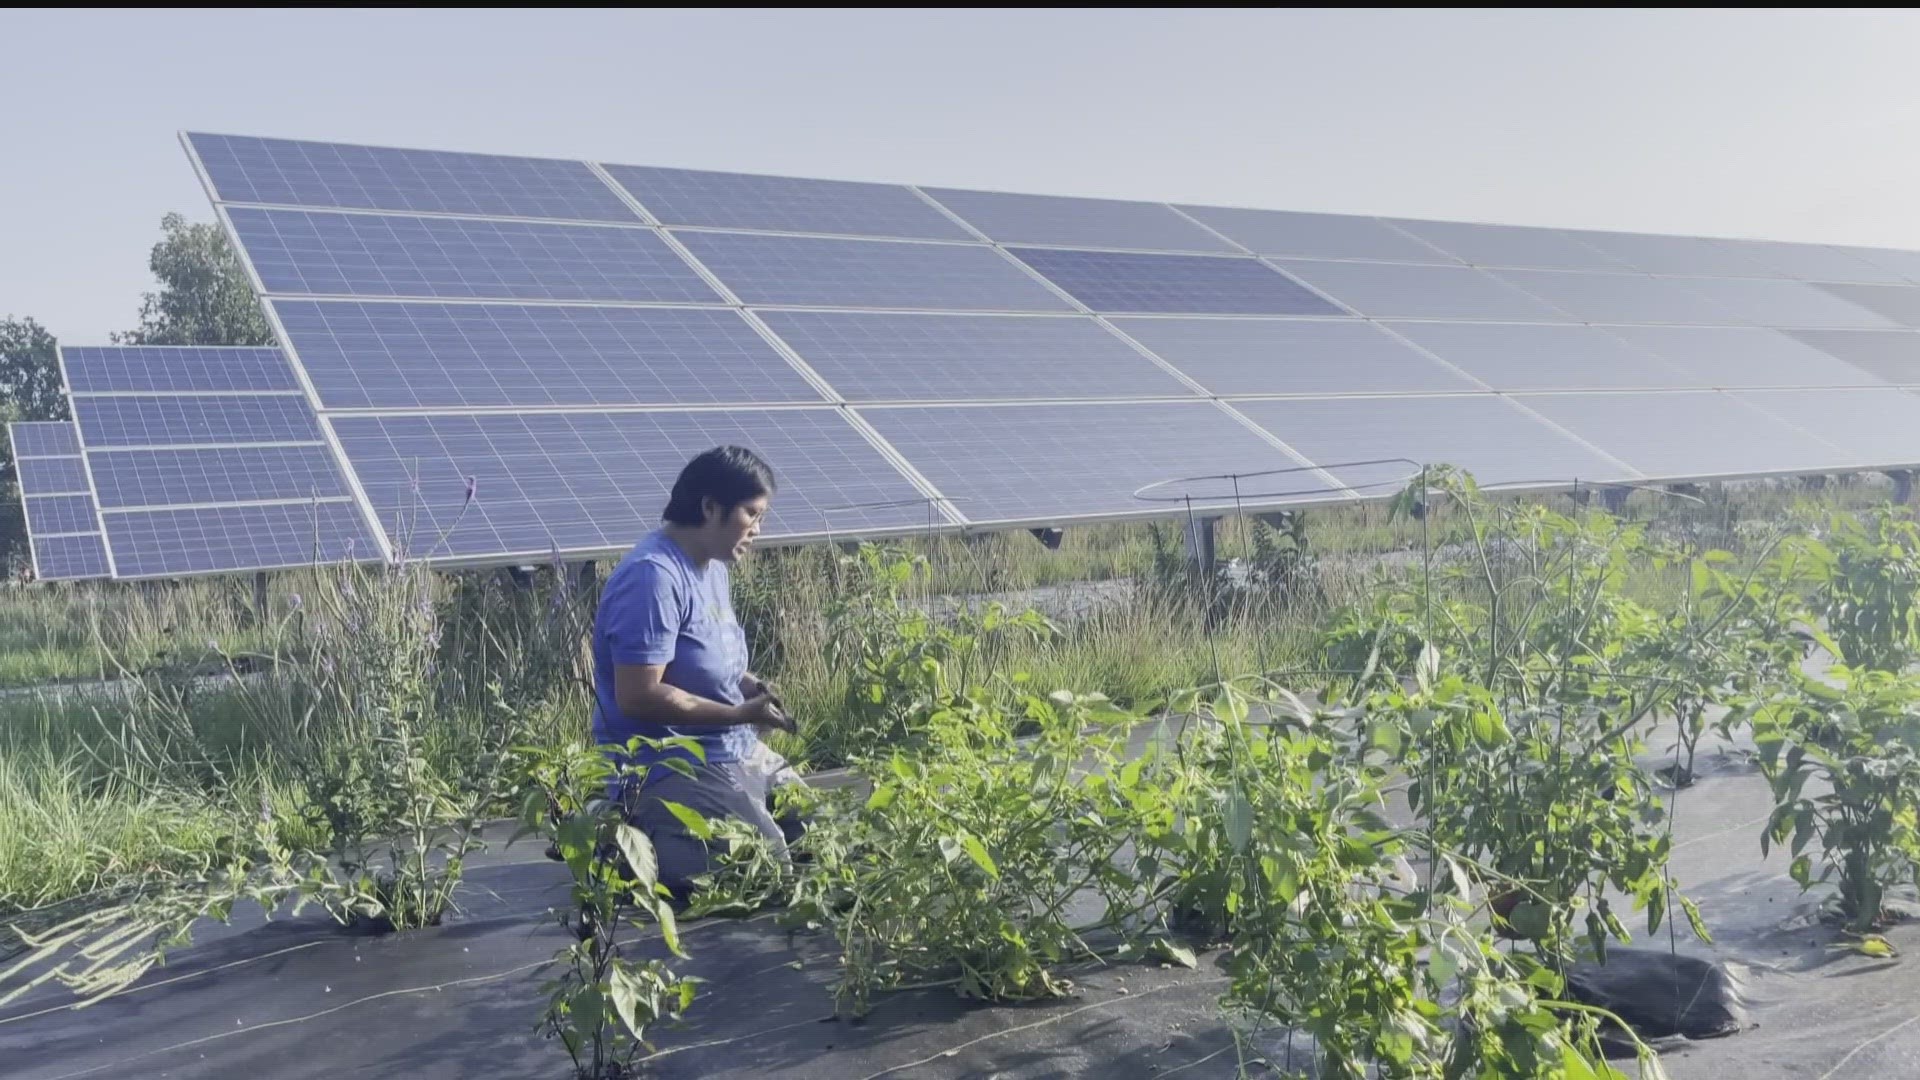 The project in Ramsey allows for the planting of vegetables in between solar panels.